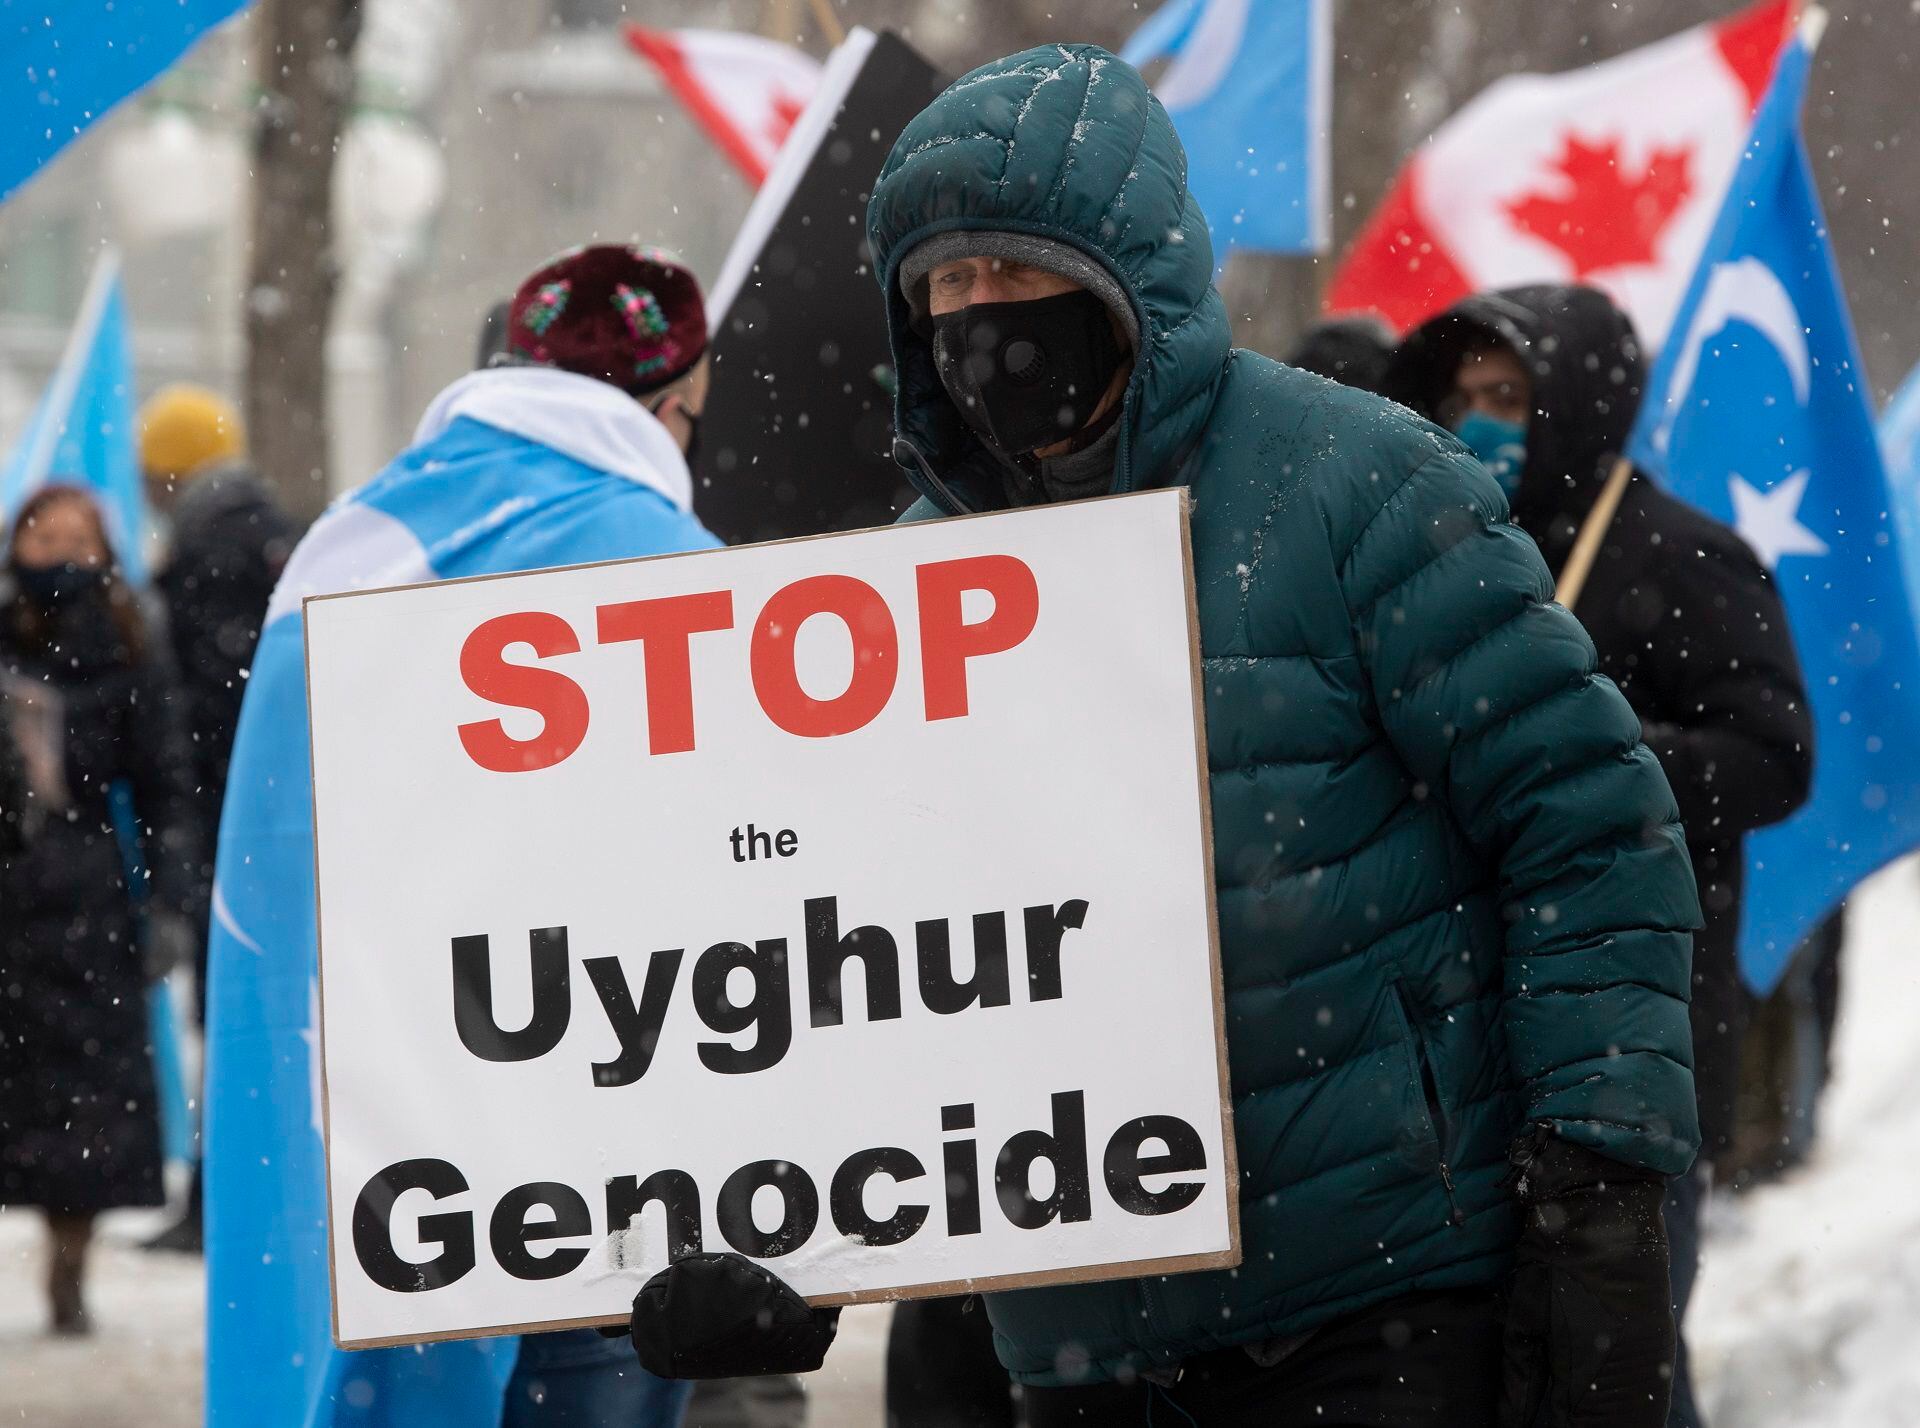 Protesters gather outside the Parliament buildings in Ottawa, Ontario Monday, Feb. 22, 2021. Parliament is expected to vote on an opposition motion calling on Canada to recognize China's actions against ethnic Muslim Uighurs as genocide.  (Adrian Wyld / The Canadian Press via AP)